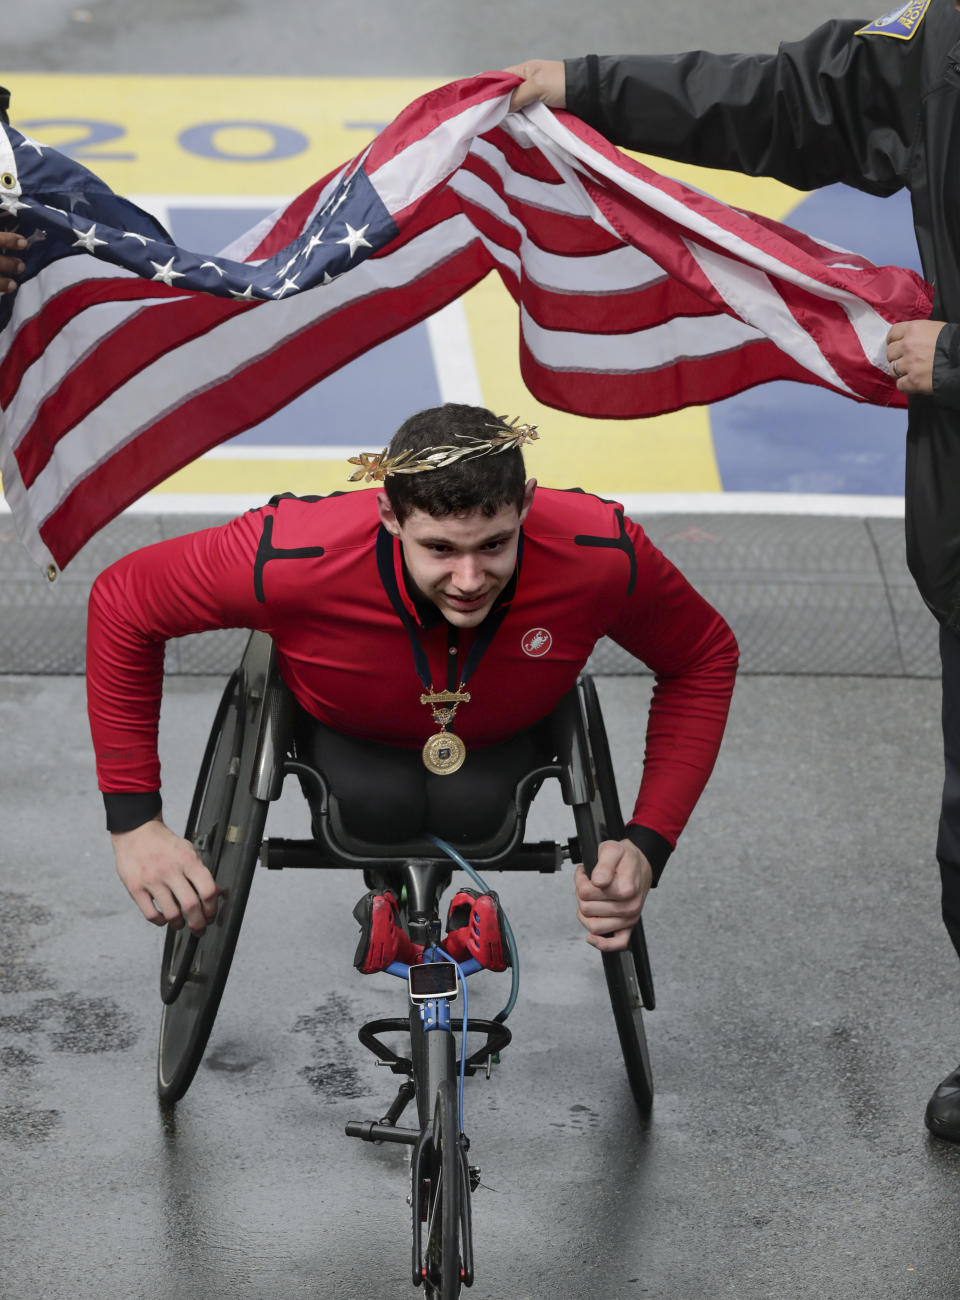 Daniel Romanchuk, of Urbana, Ill., wears the victor's wreath after winning the men's handcycle division of the 123rd Boston Marathon on Monday, April 15, 2019, in Boston. (AP Photo/Charles Krupa)